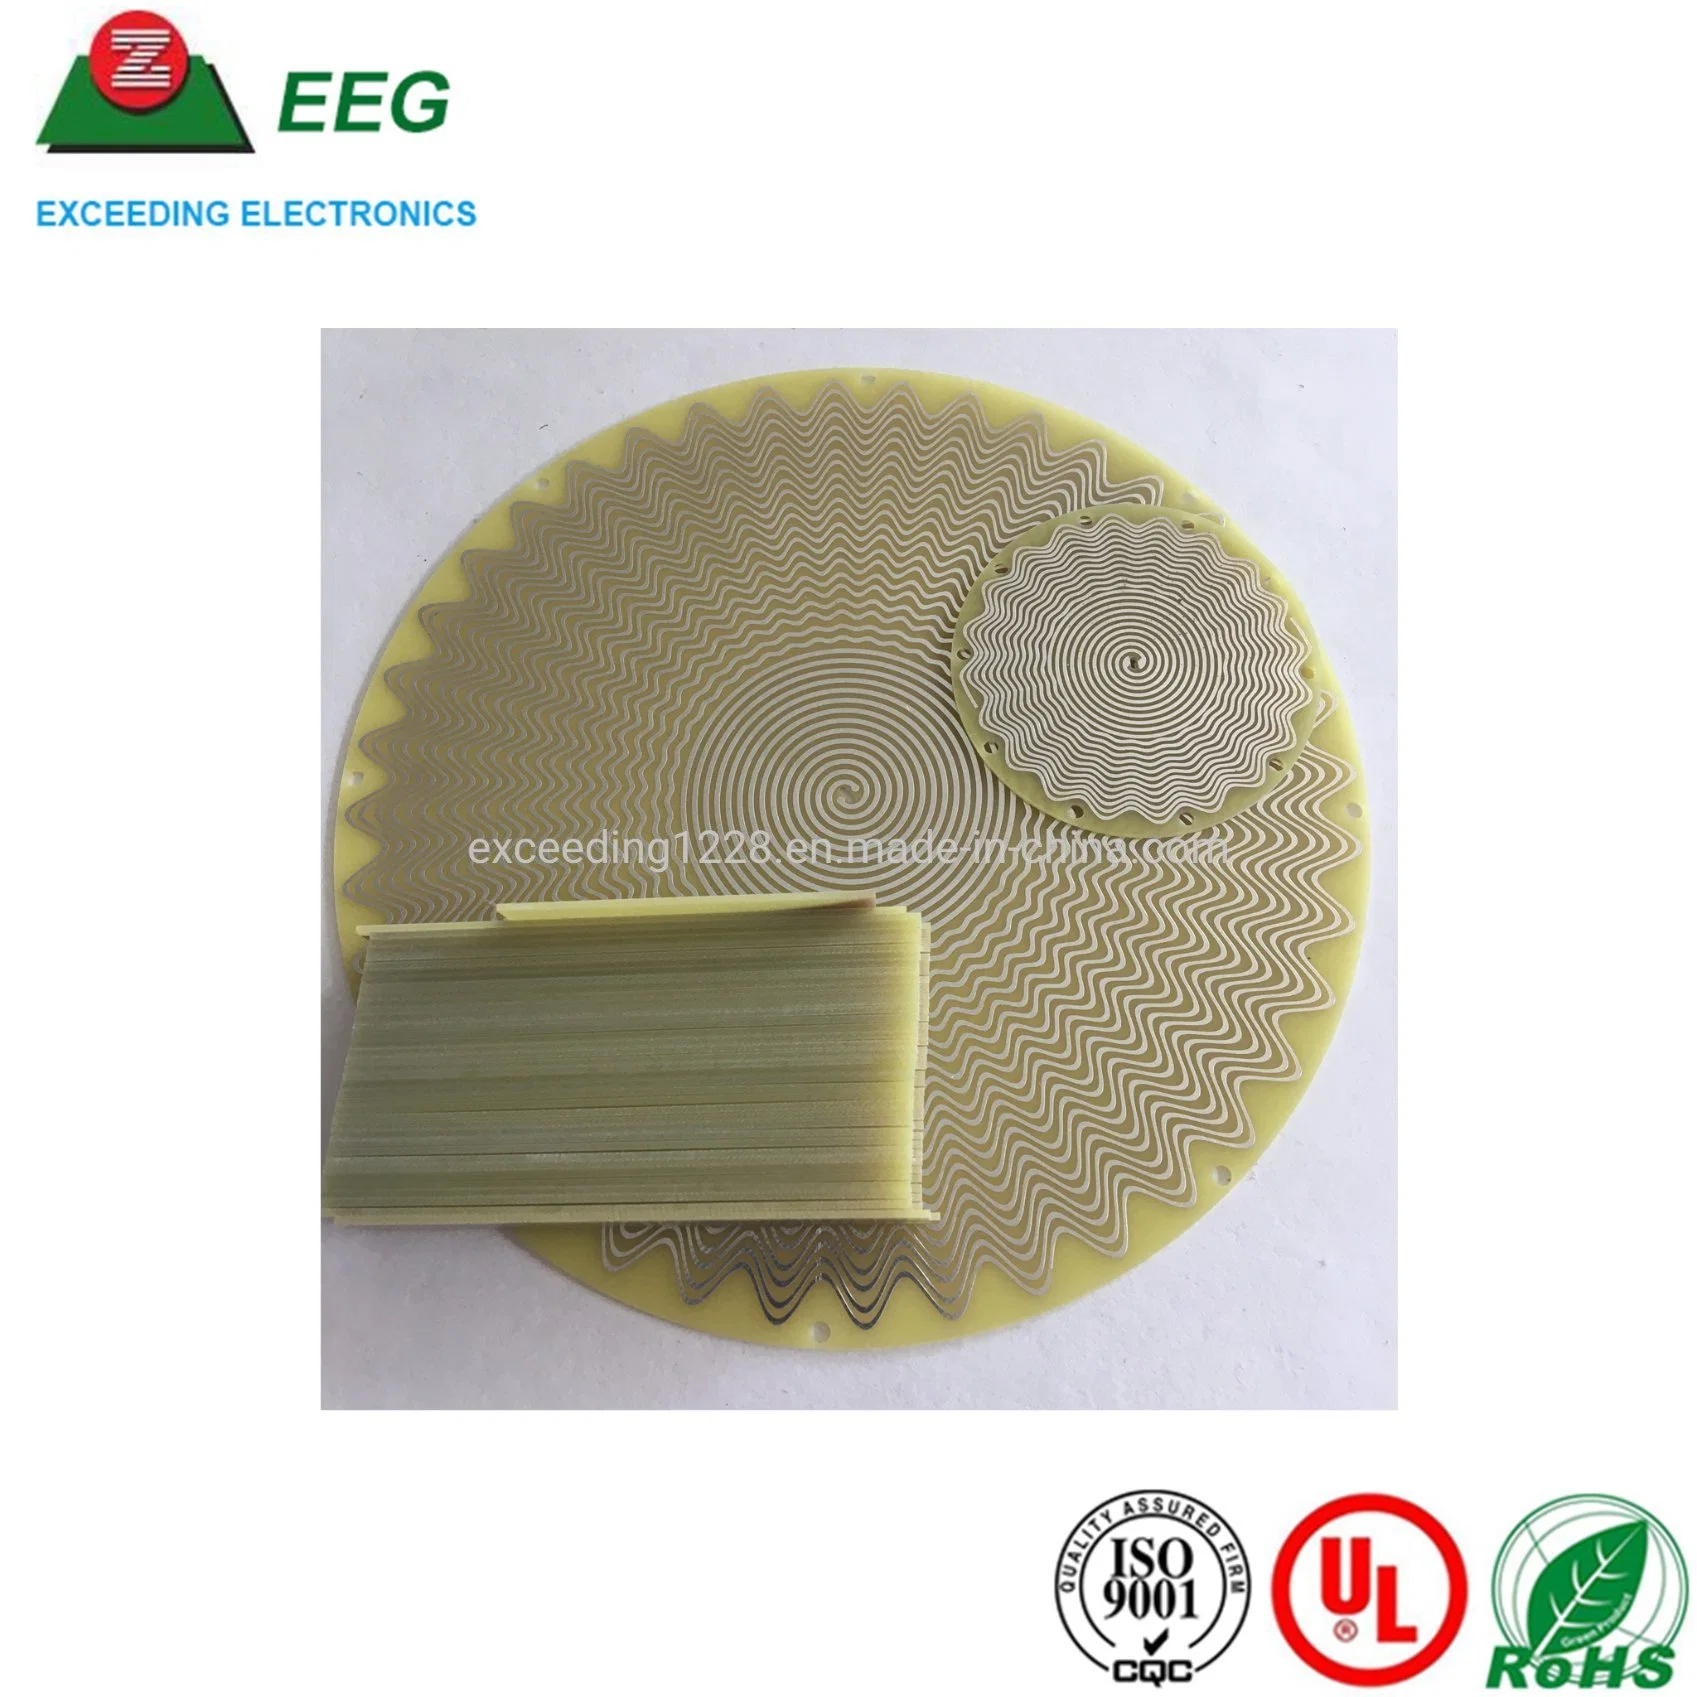 Printed Circuit Board Prototype/High Frequency Circuit Board in Quick Delivery